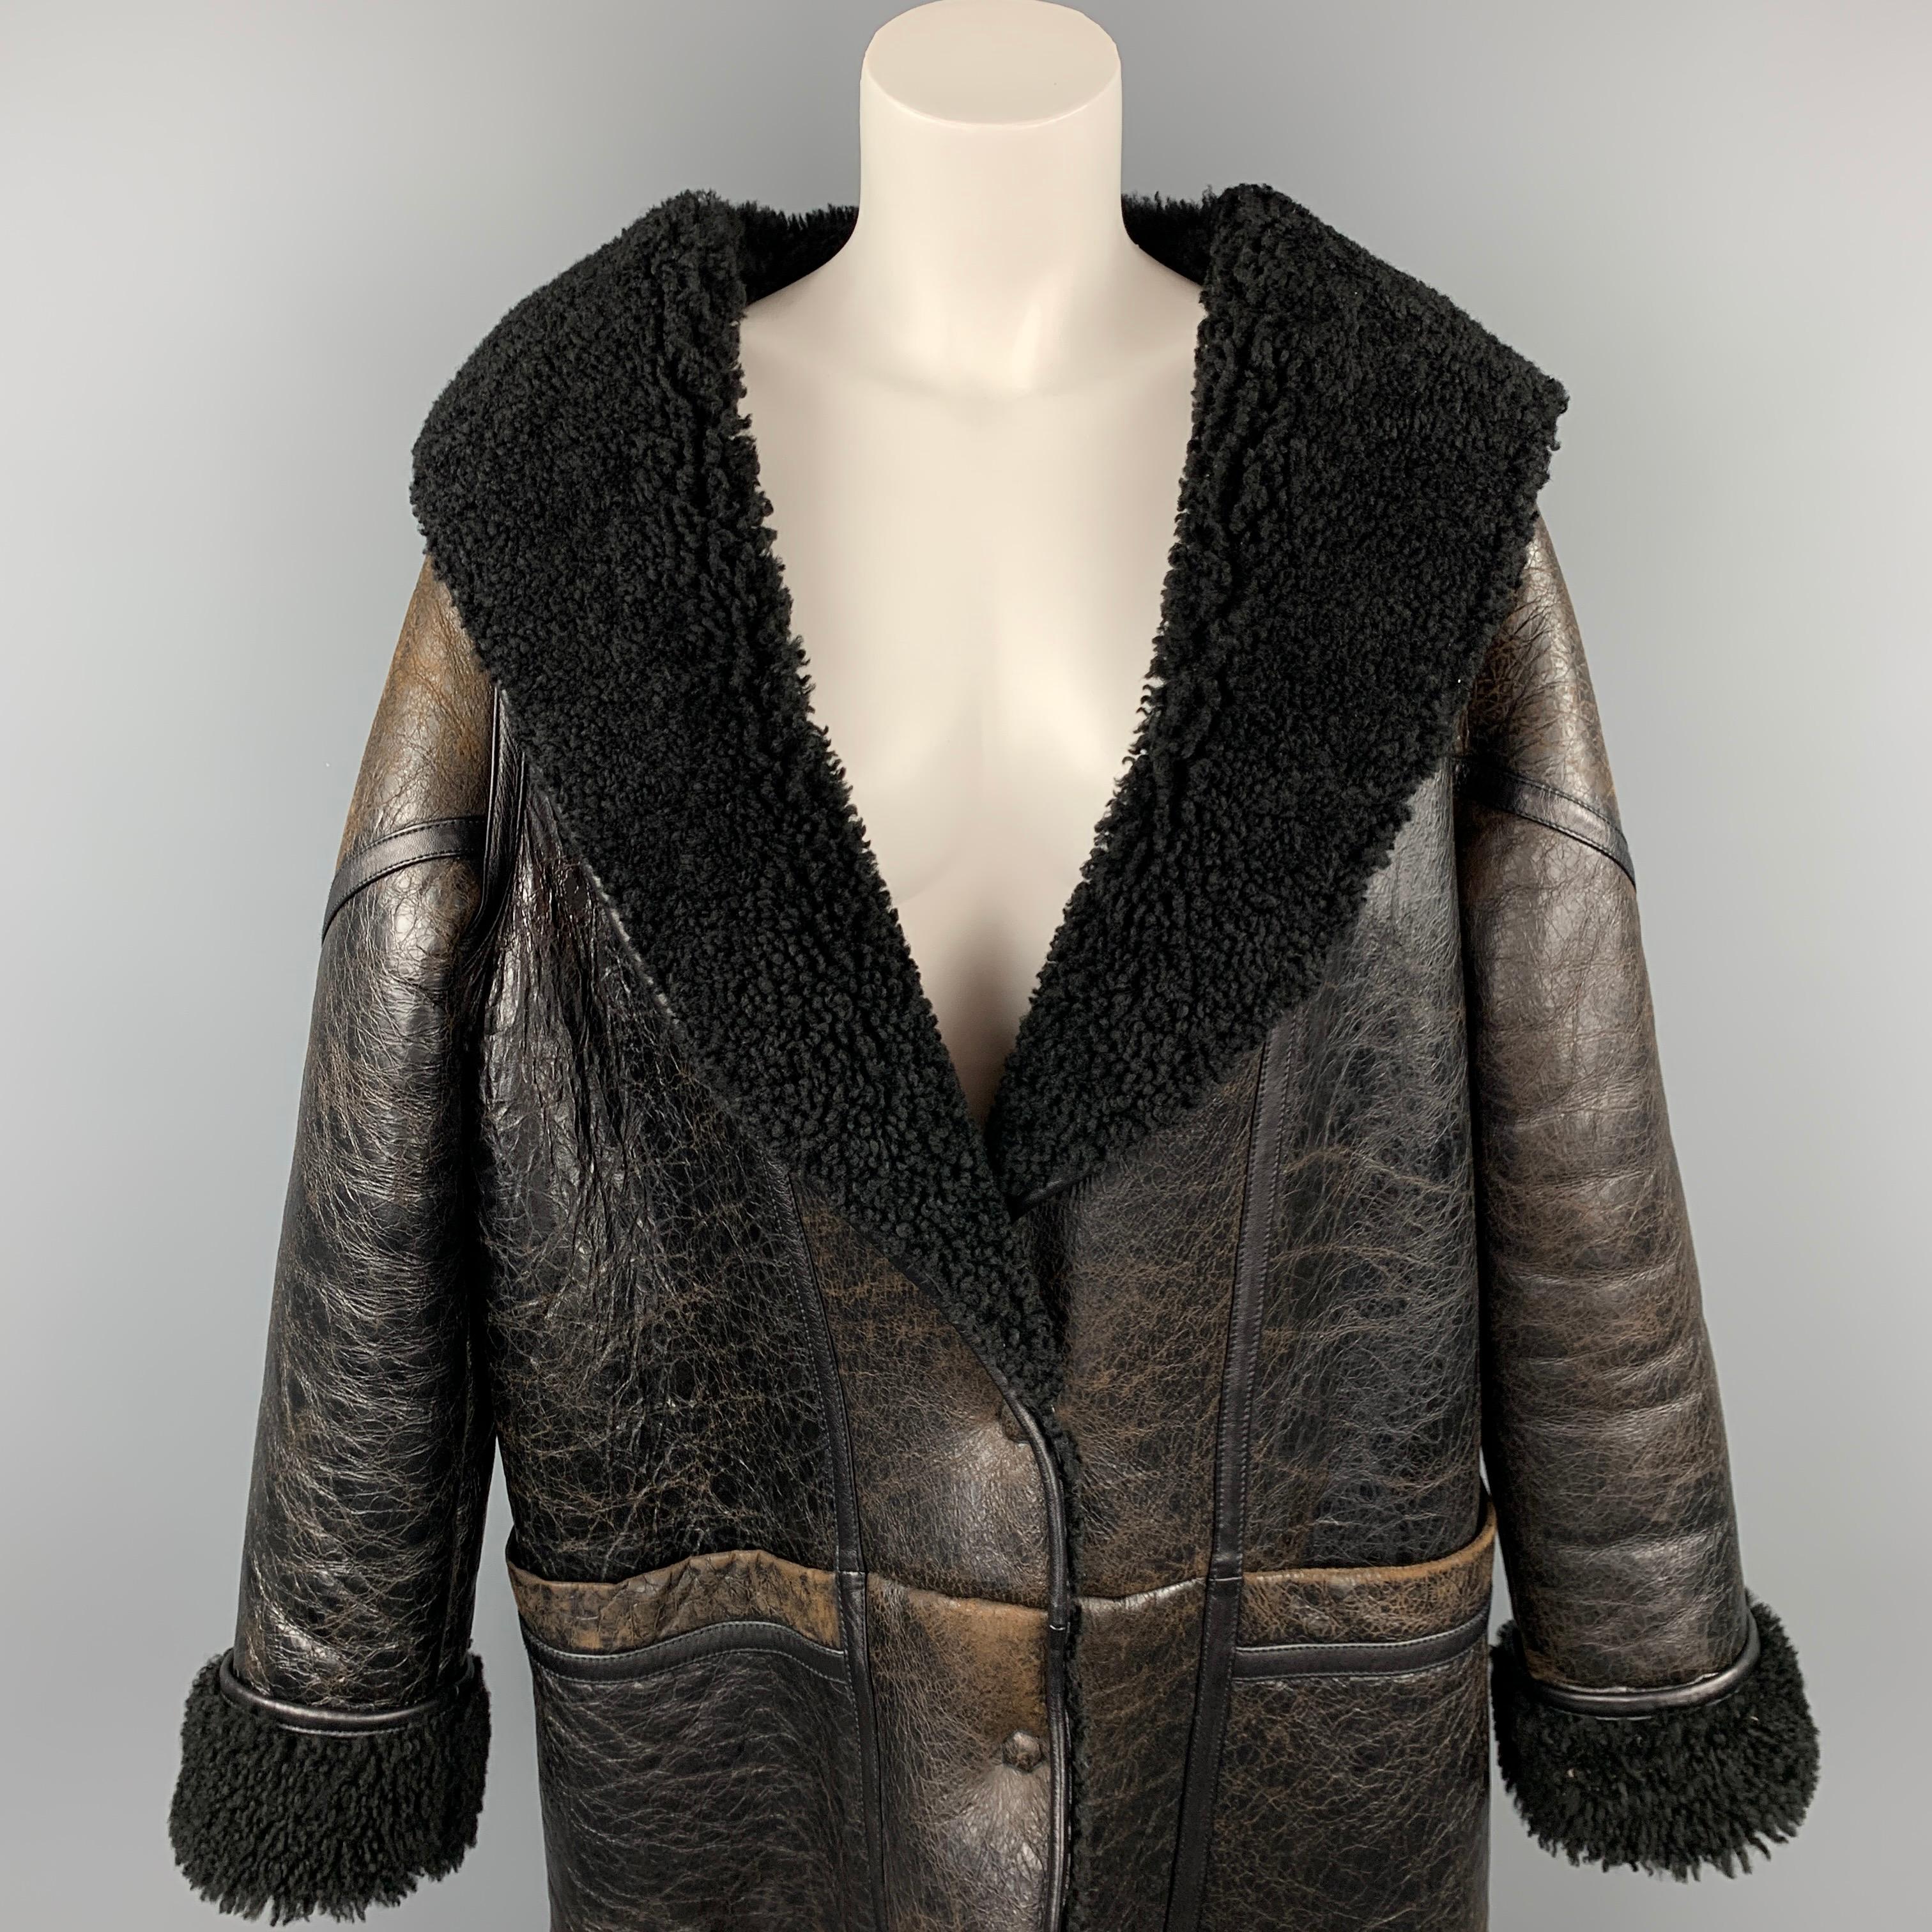 GOLDEN GOOSE coat comes in a dark brown crackled leather with a black shearling liner featuring a oversized style, maxi pockets, hooded, and a snap button closure. Made in Italy.

Very Good Pre-Owned Condition.
Marked: S

Measurements:

Shoulder: 19